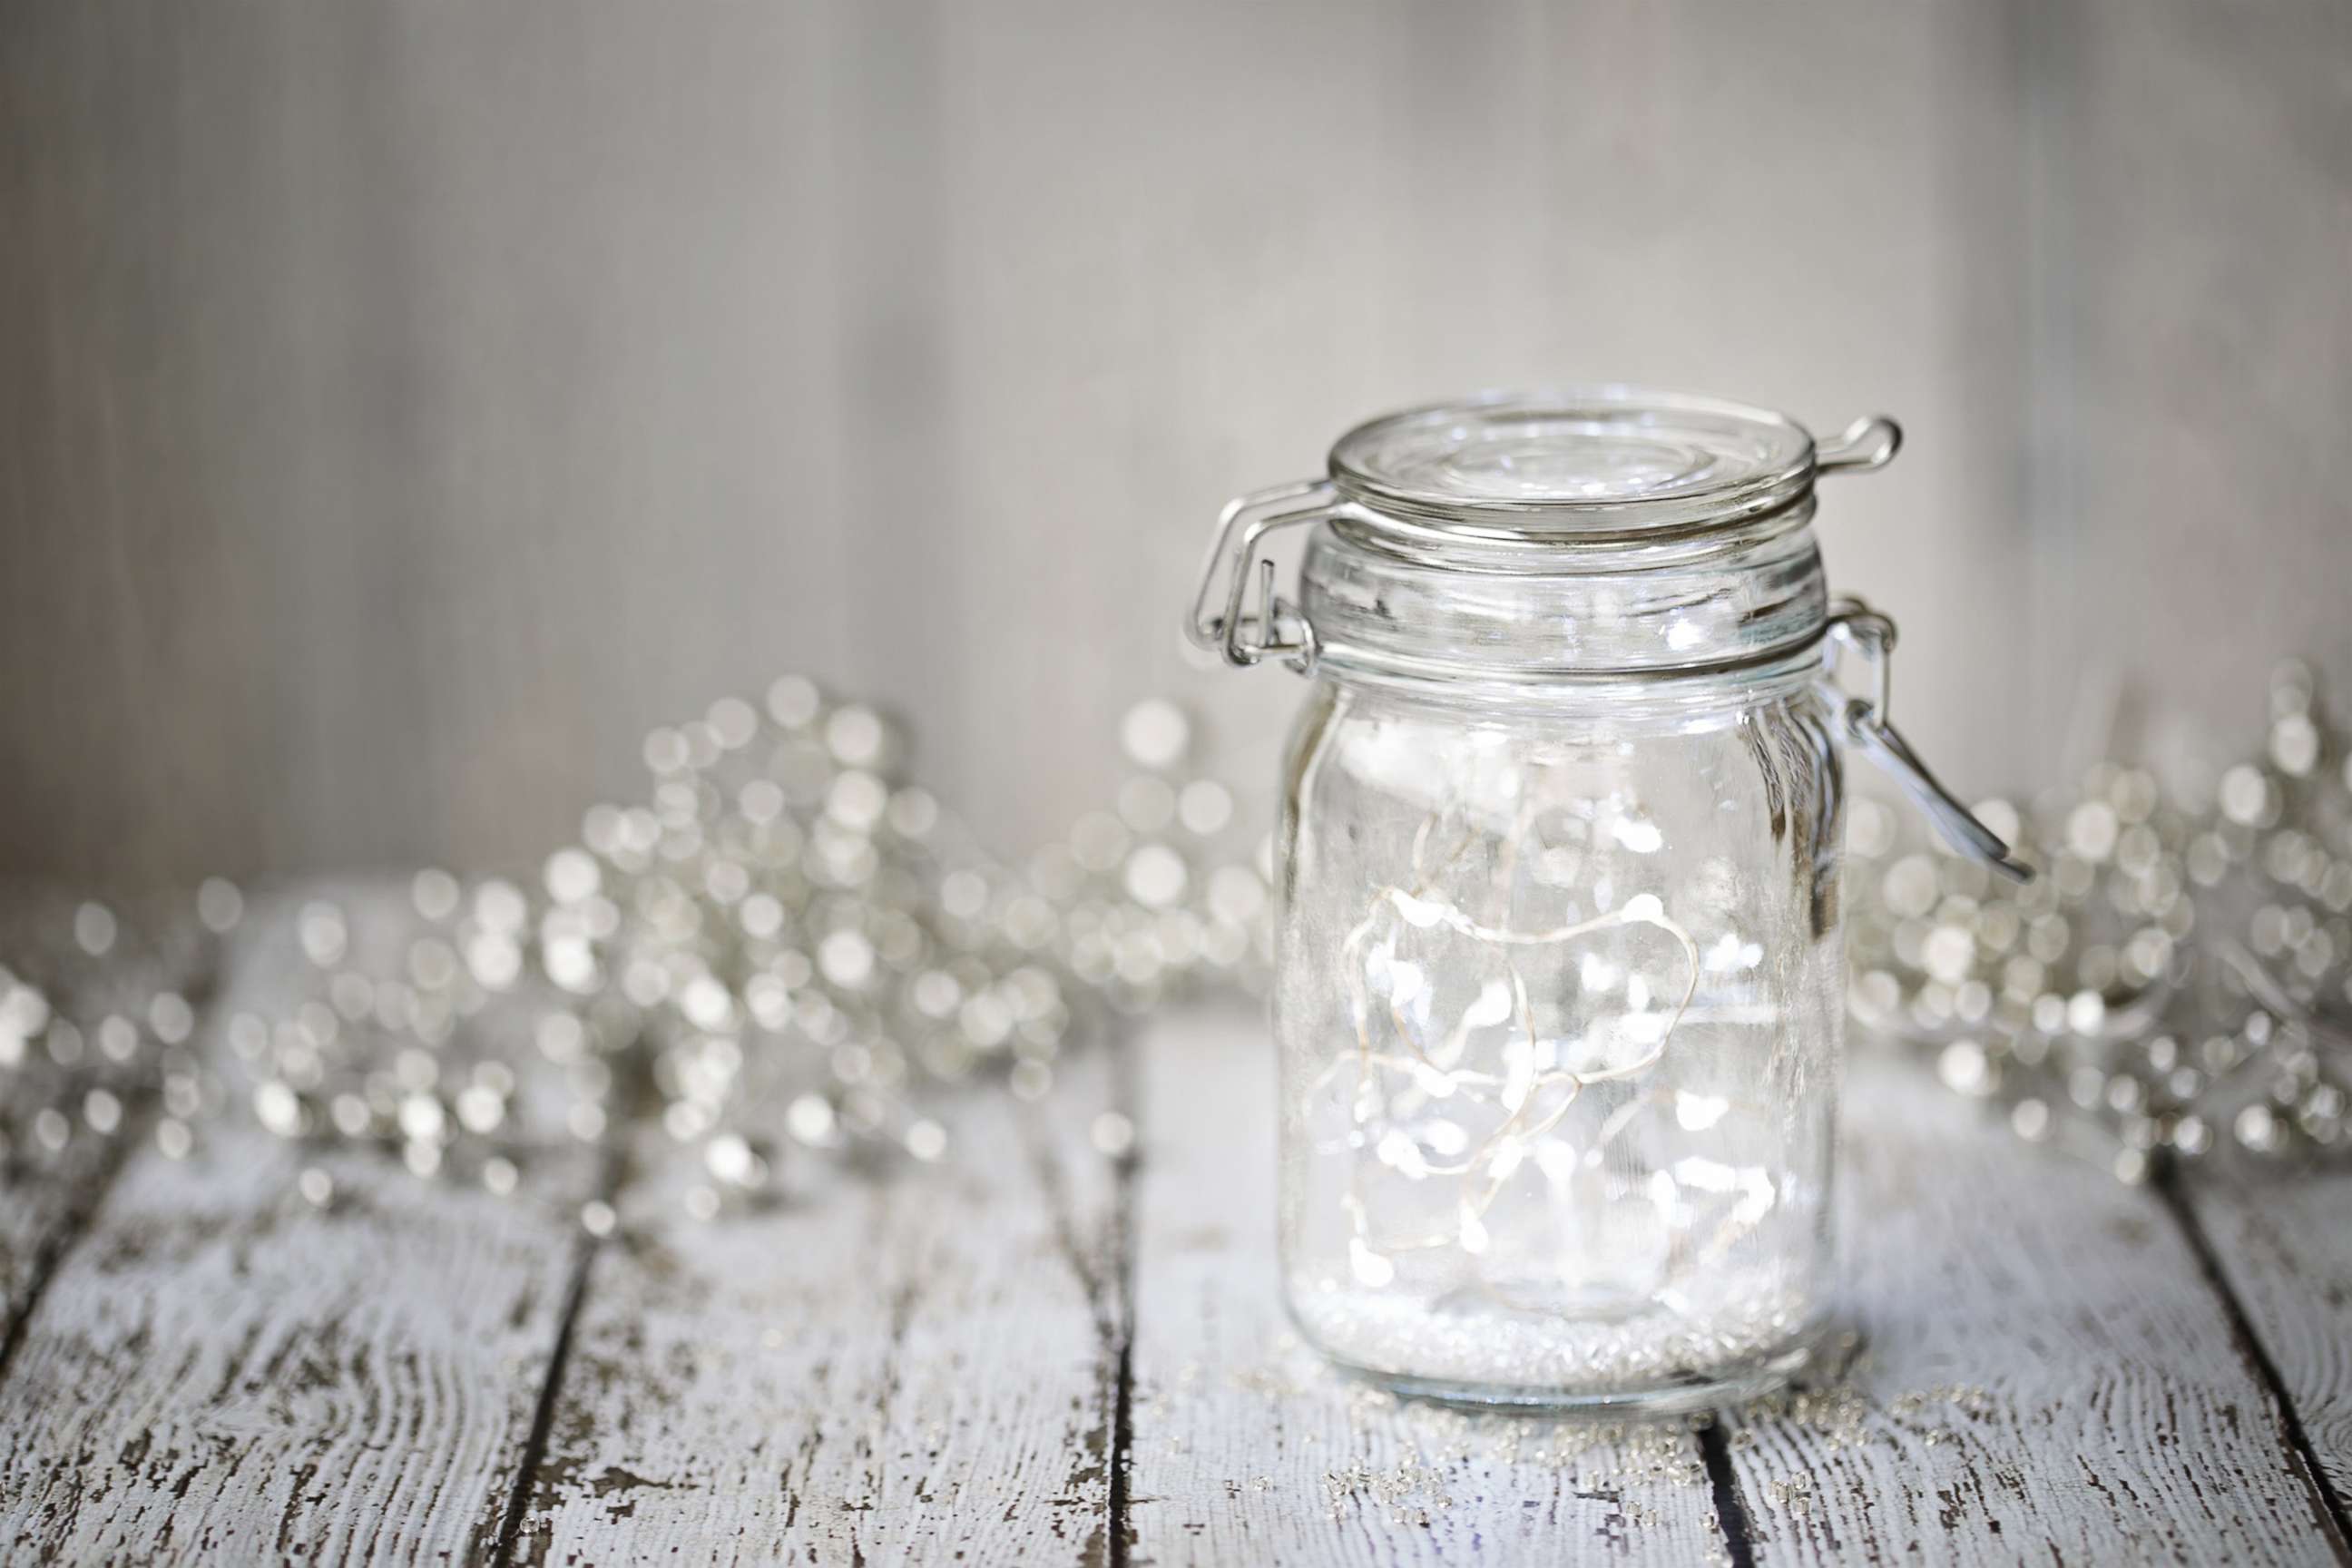 PHOTO: Fairy lights fill a jar in an undated stock image.